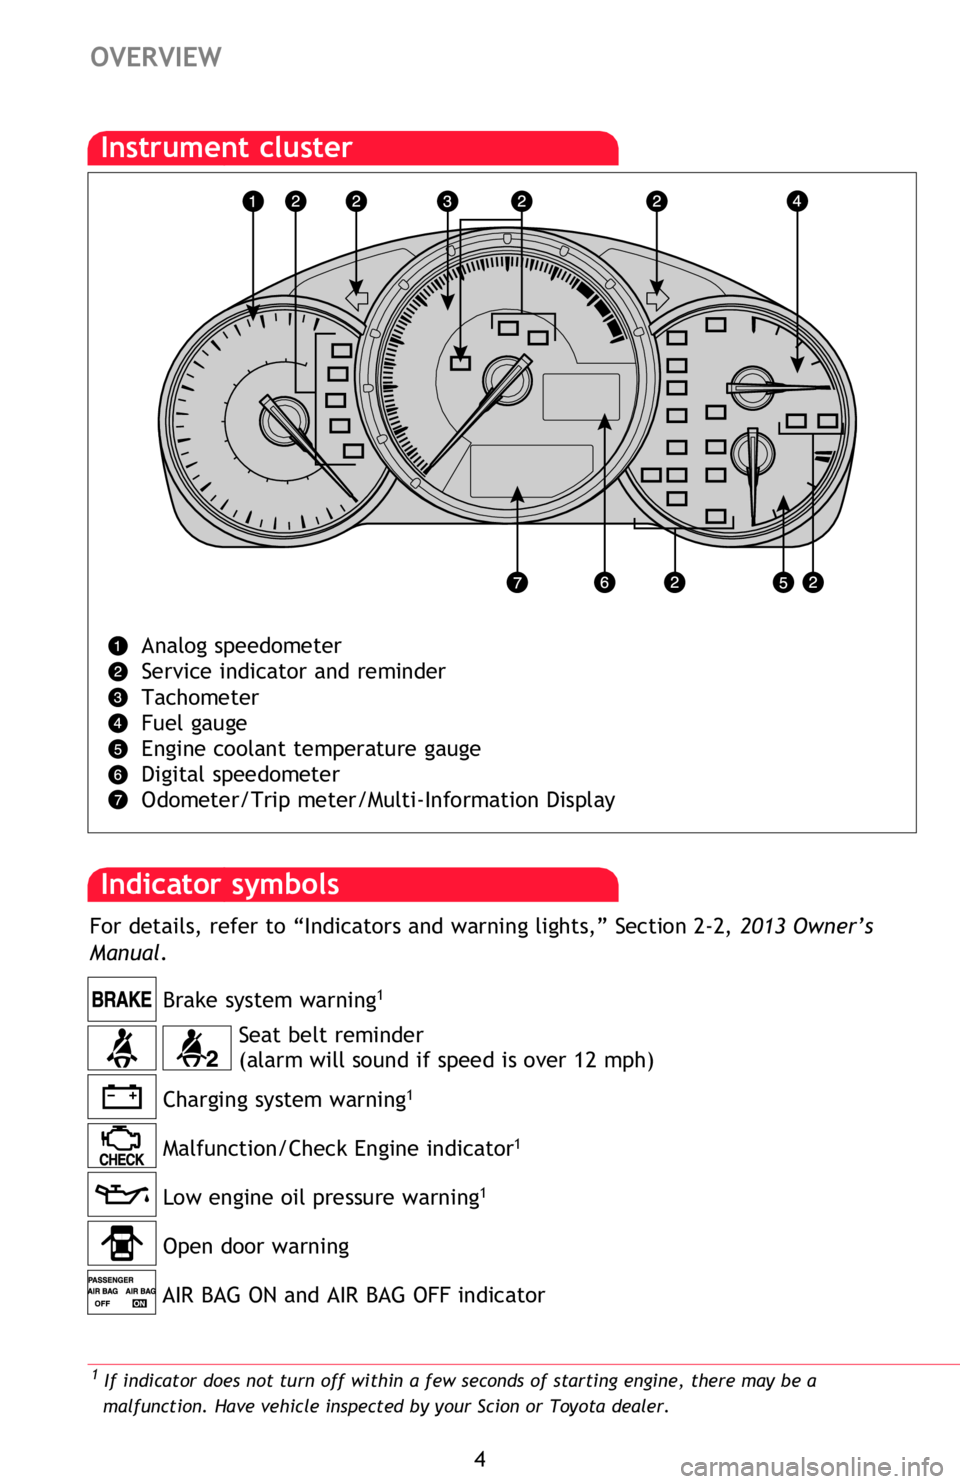 TOYOTA FR-S 2013  Owners Manual (in English) 4
OVERVIEW
2 If this light come on in yellow, refer to “Cruise control” Section 2-4, 2013 Owner’s Manual.
Instrument cluster
Seat belt reminder
(alarm will sound if speed is over 12 mph)
Brake s